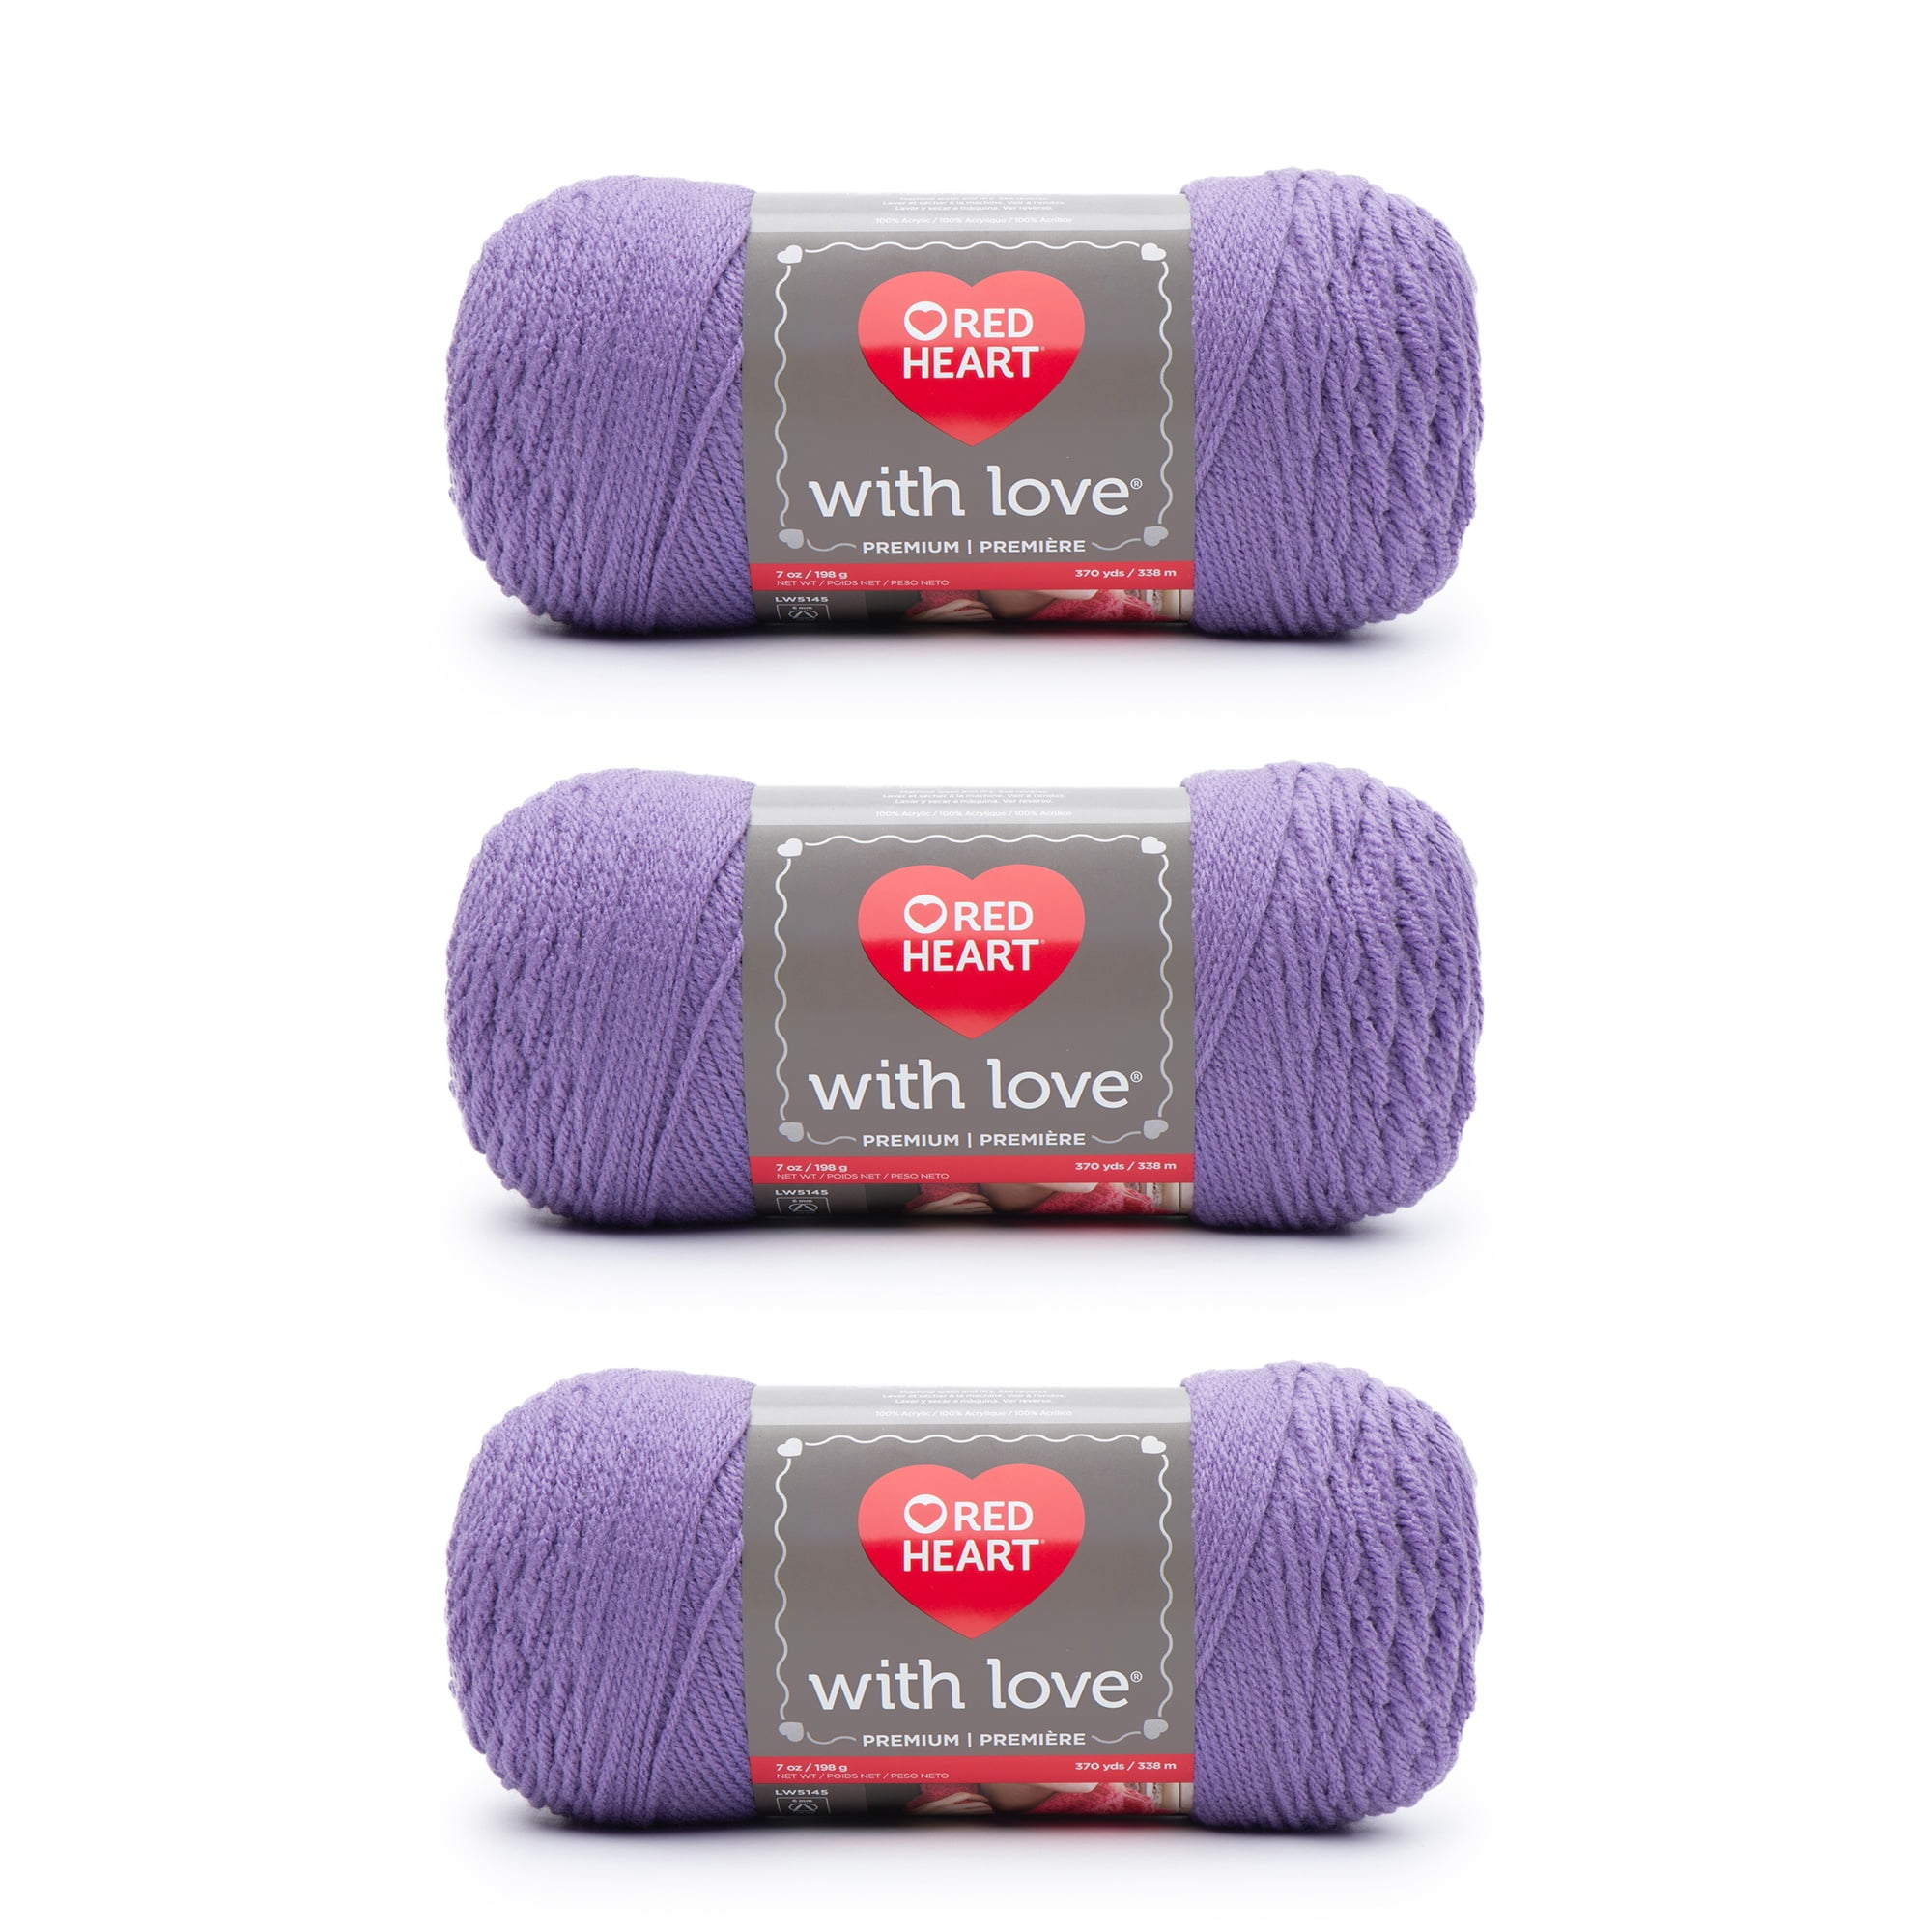 Lion Brand Yarn Go for Faux Husky Faux Fur Super Bulky Polyester Gray Yarn  3 Pack